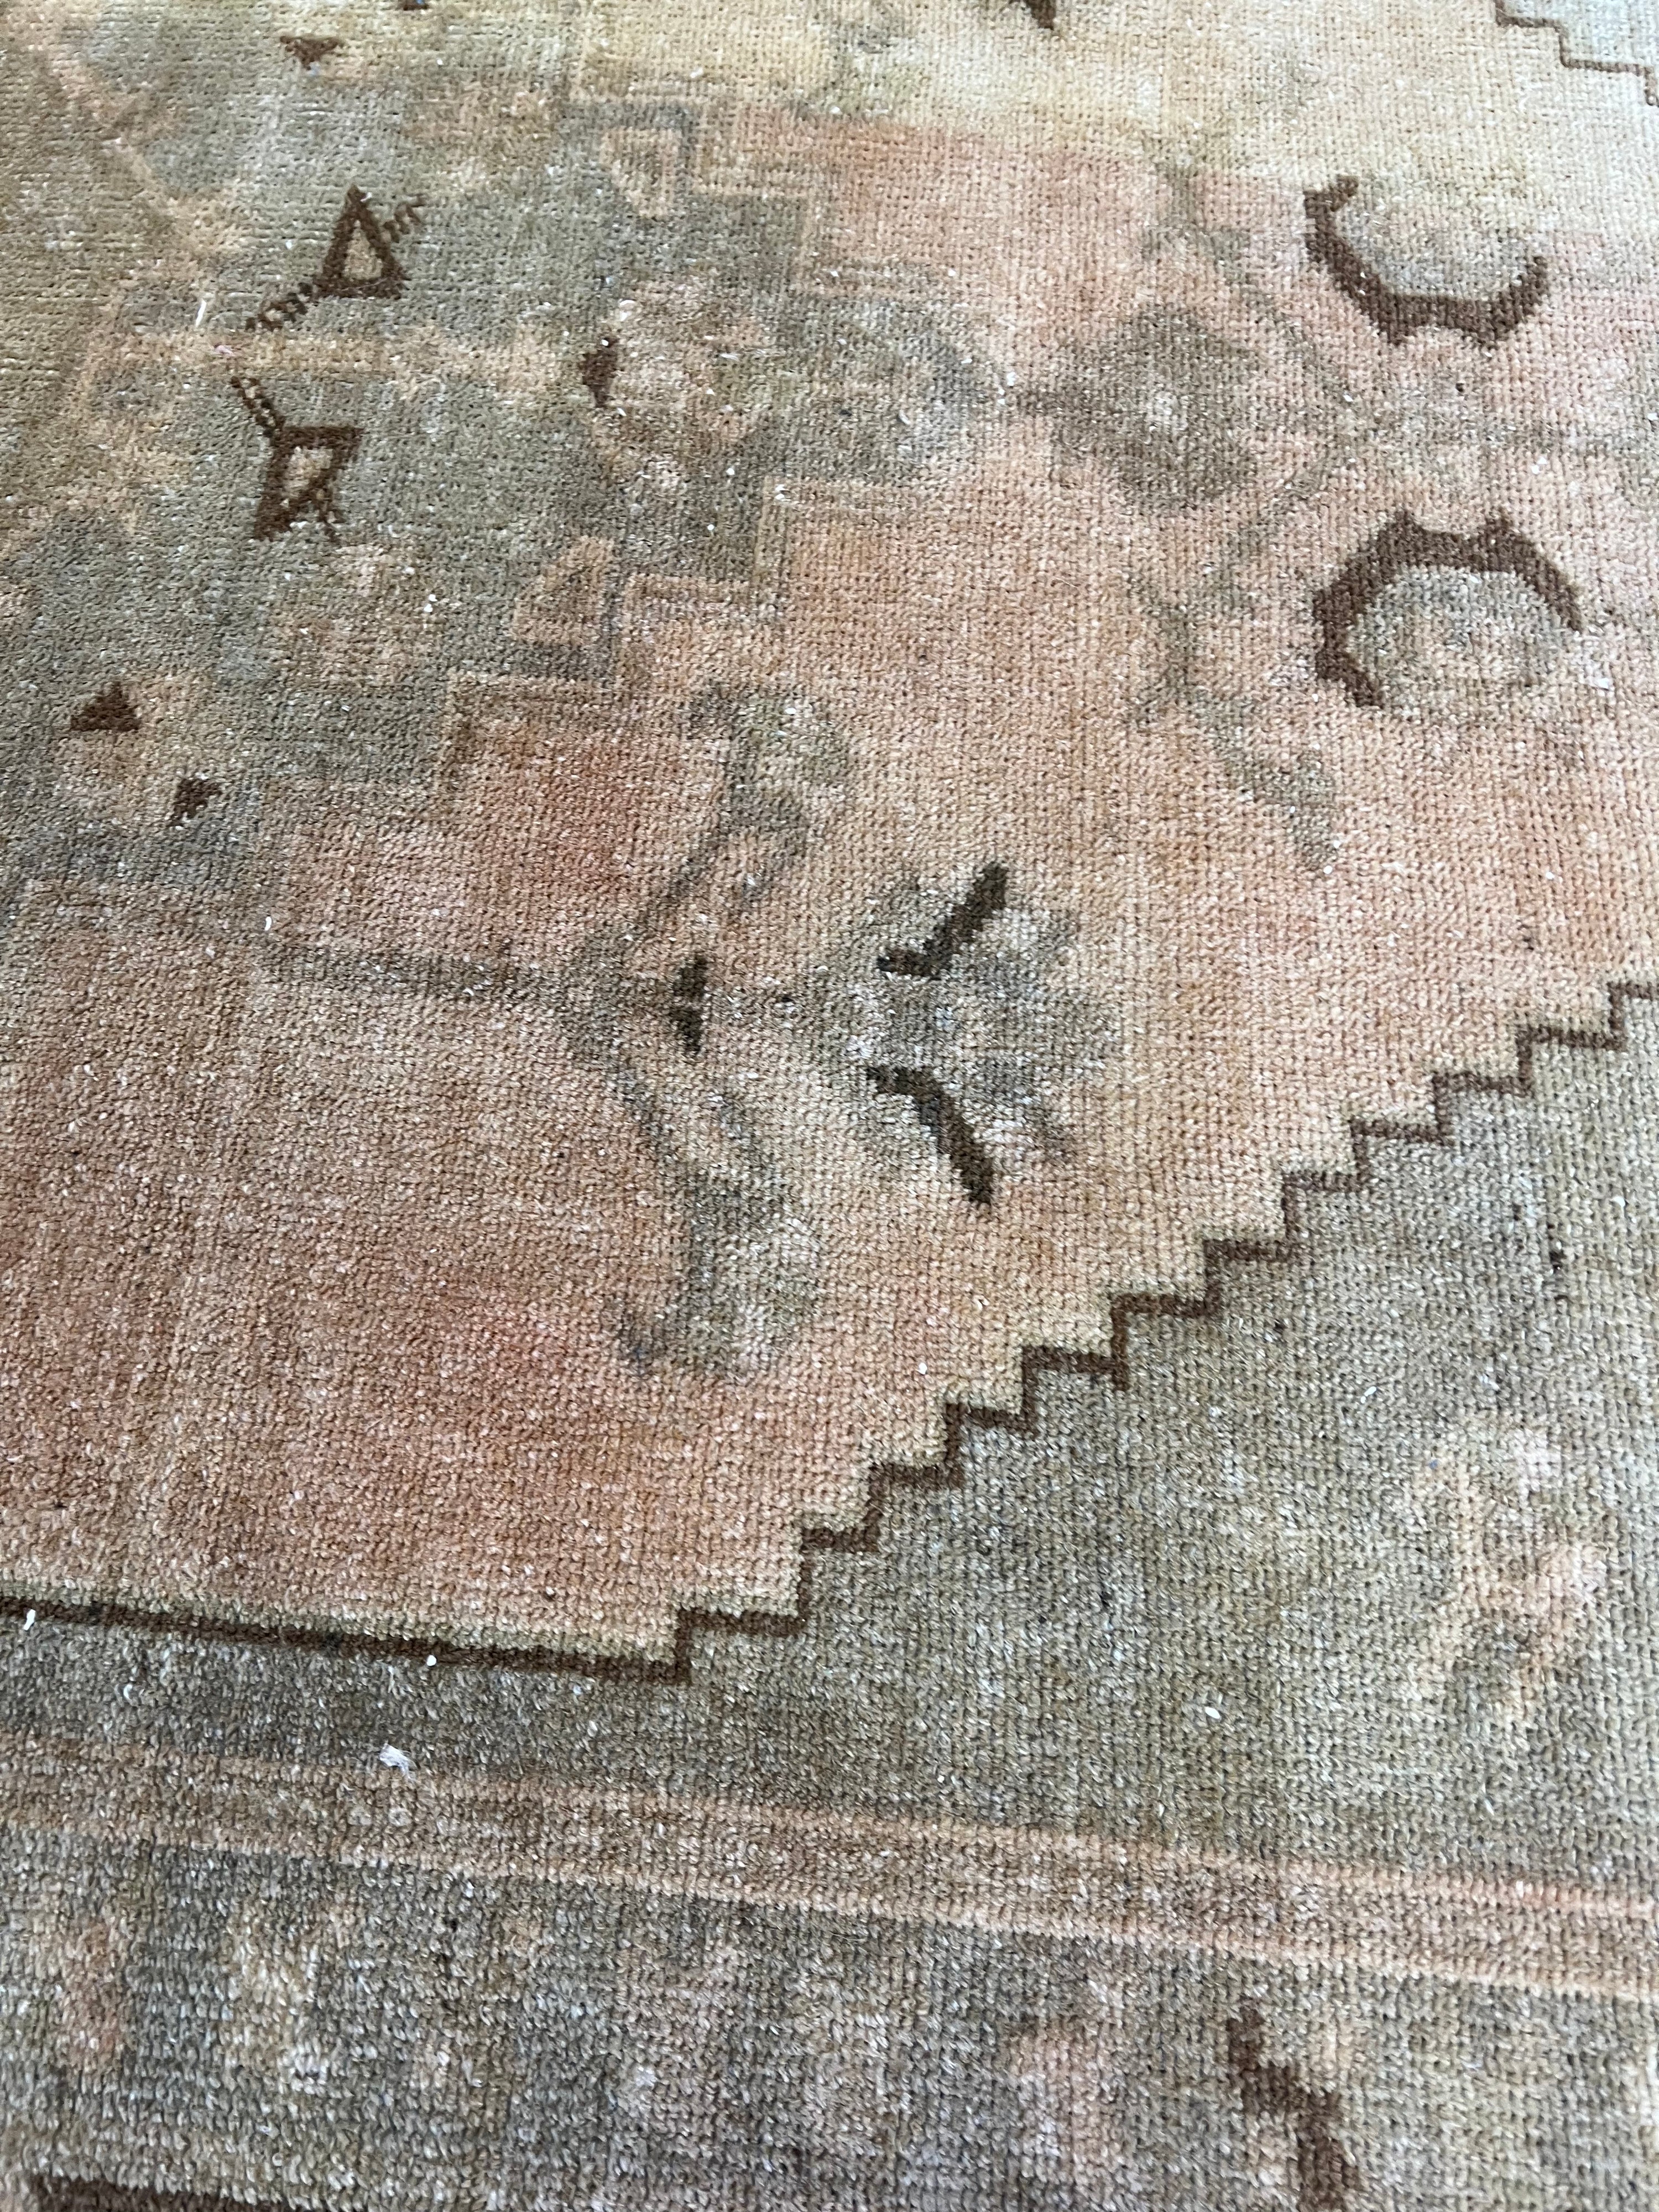 Antiqued Bleached Area Rug